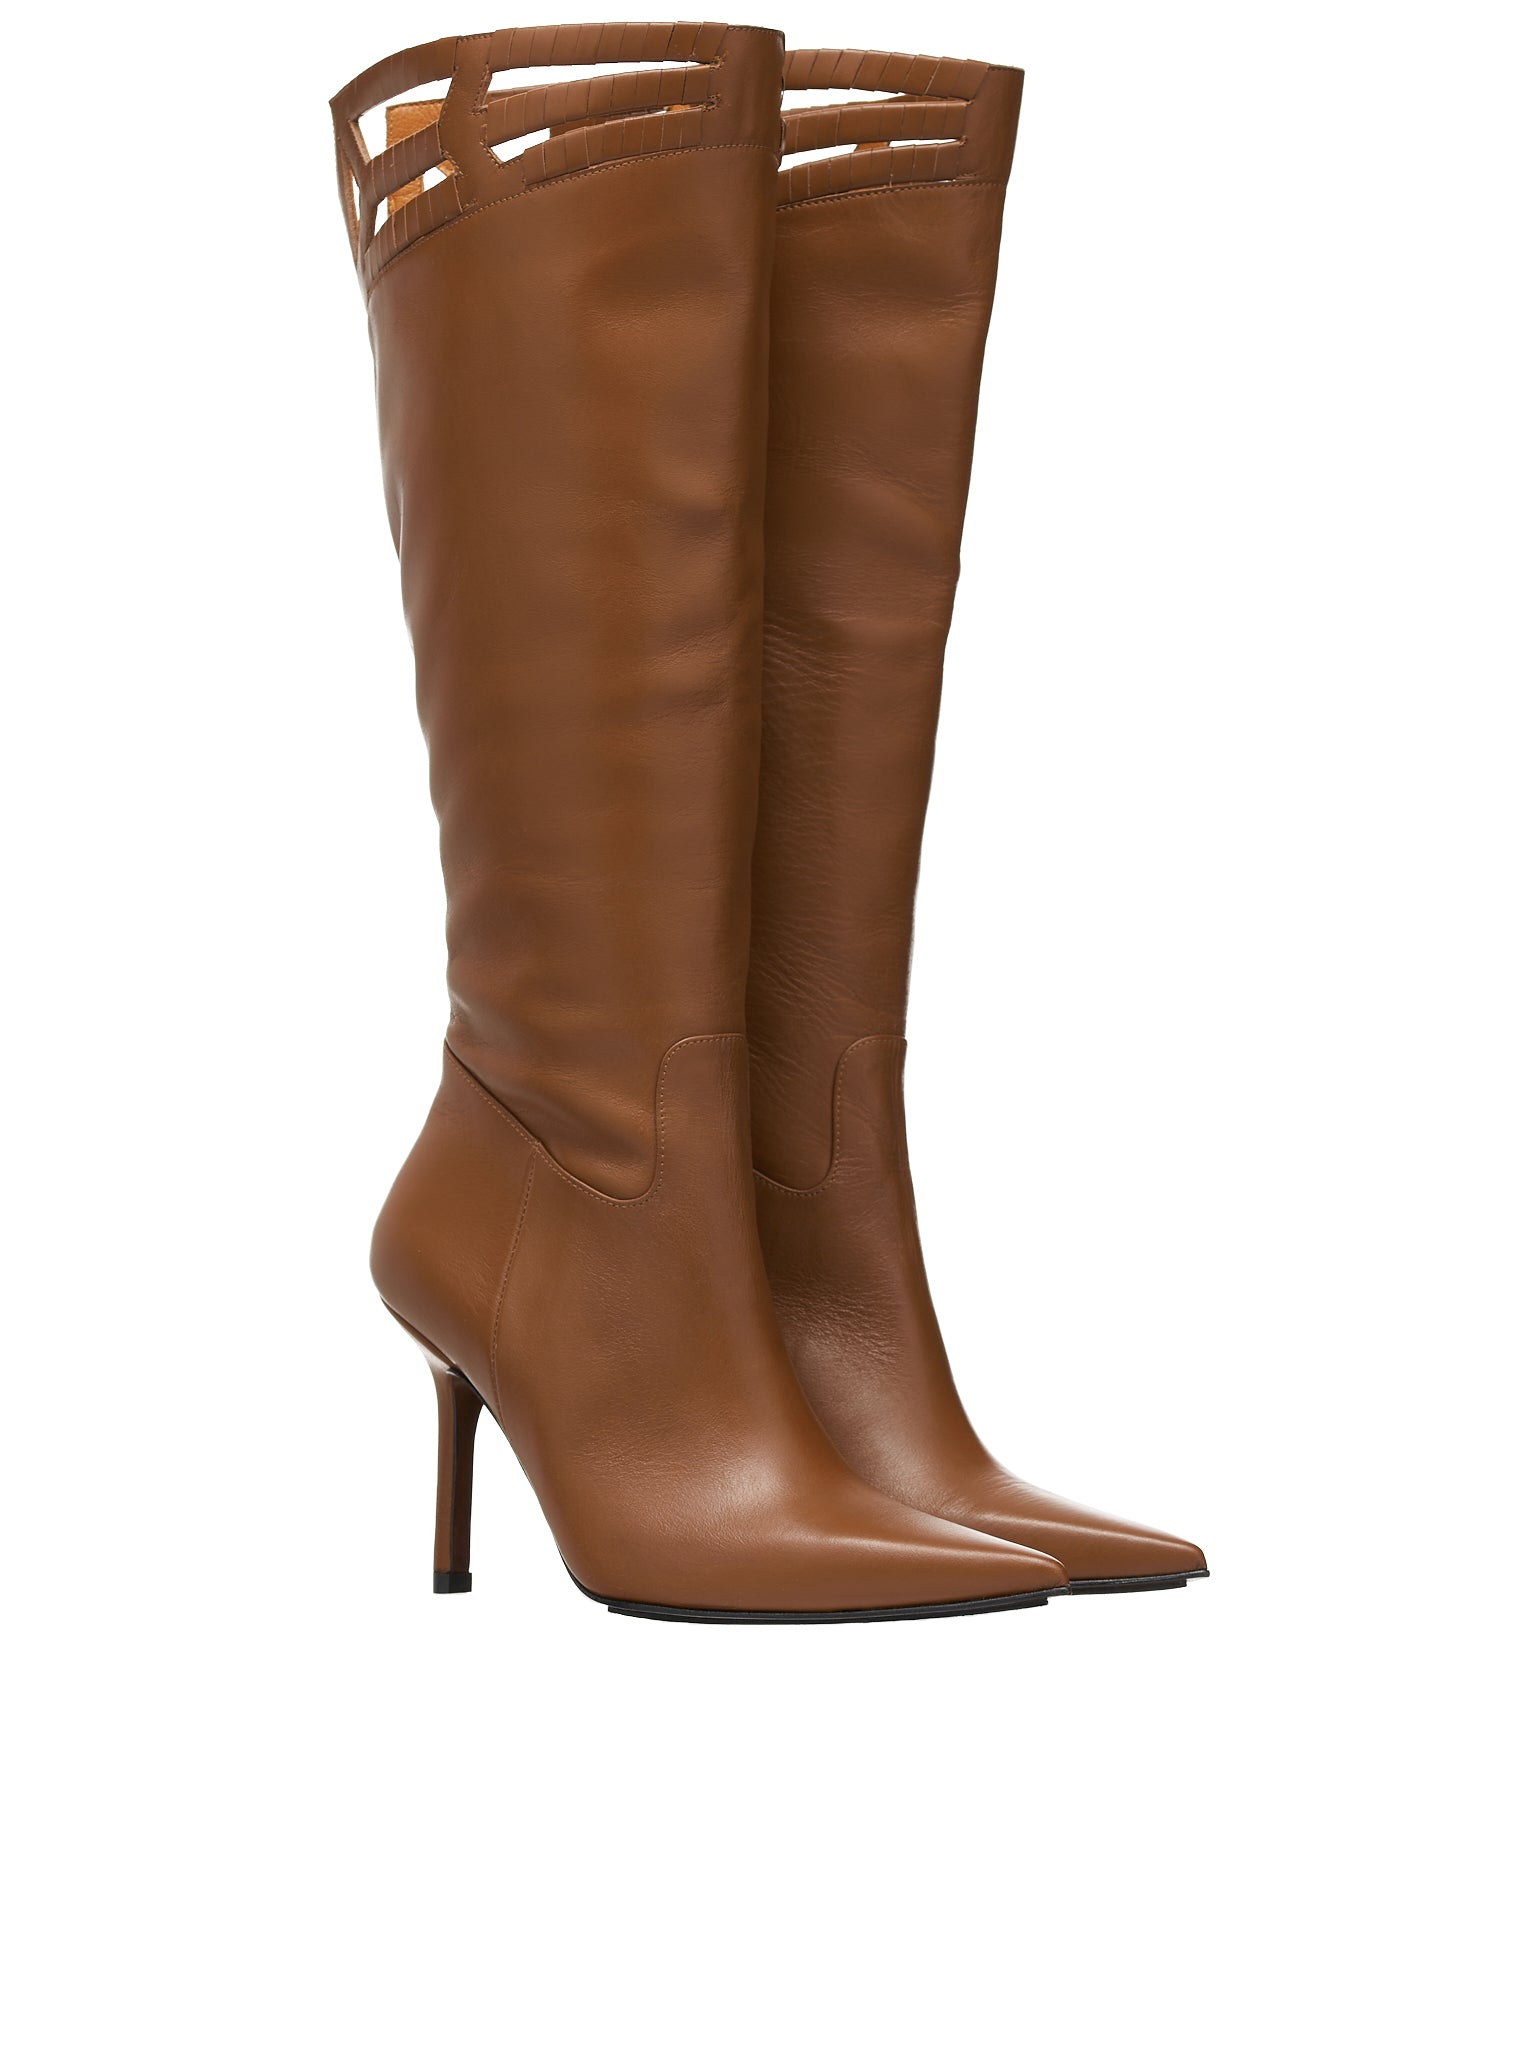 Leather Boots (WW-SHOES-5-BROWN)